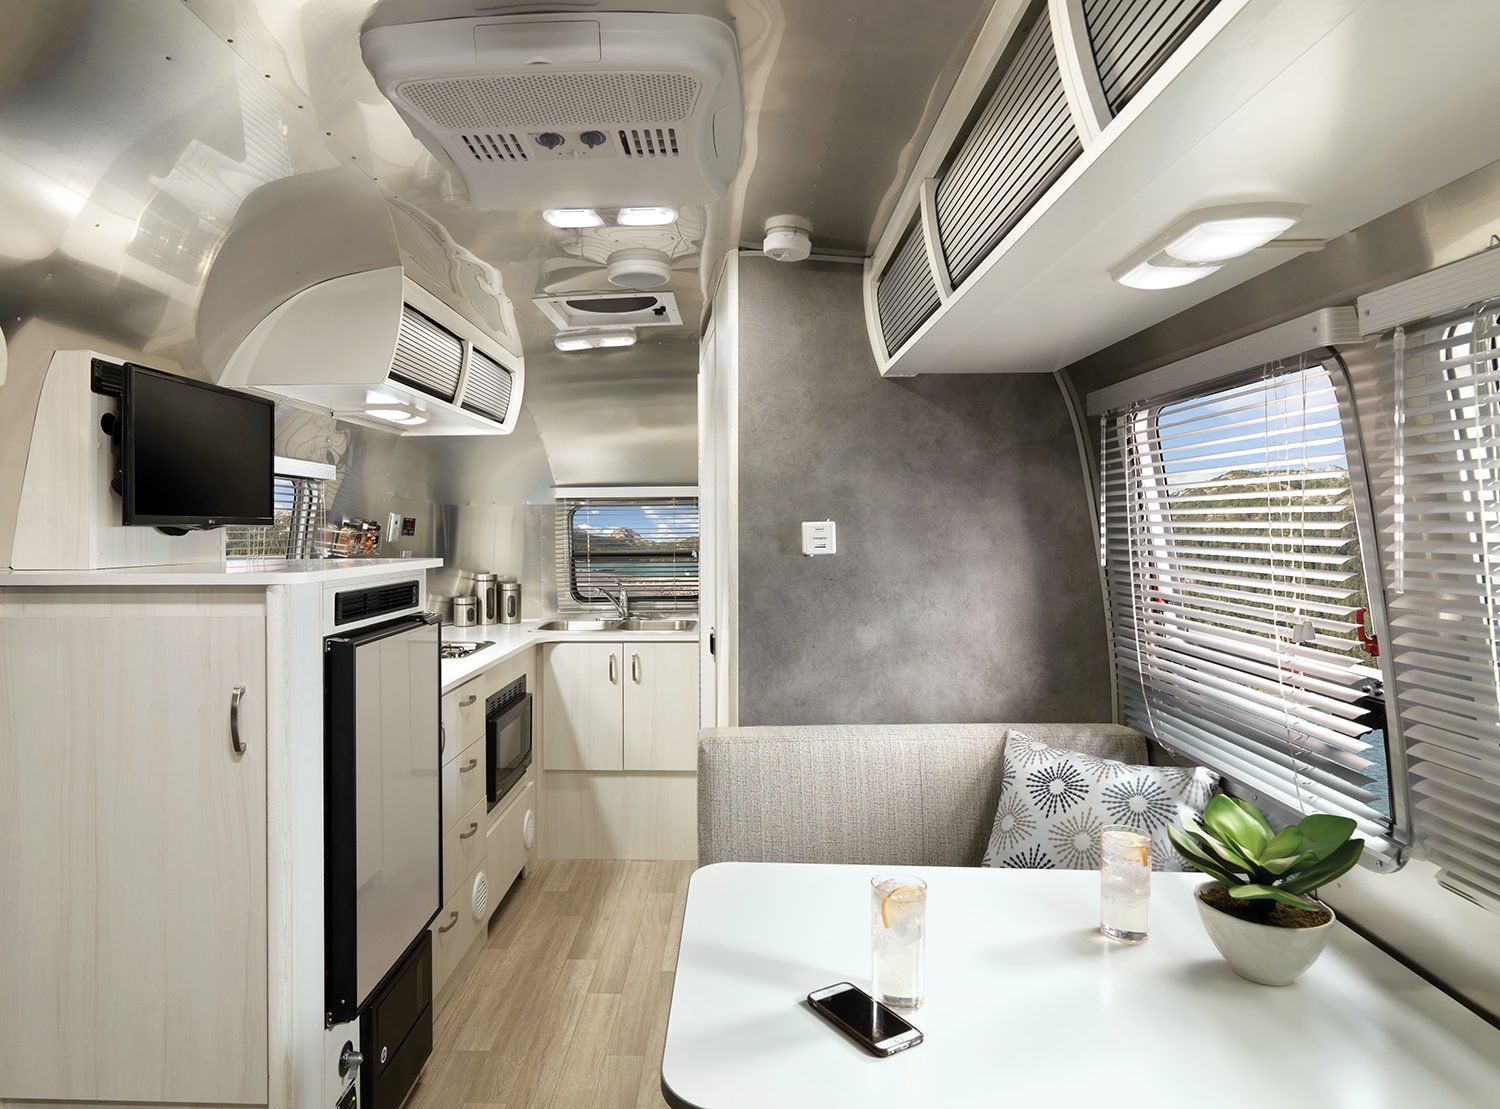 The Entire 2021 Airstream Bambi Line Up (with YouTube Video Tours)